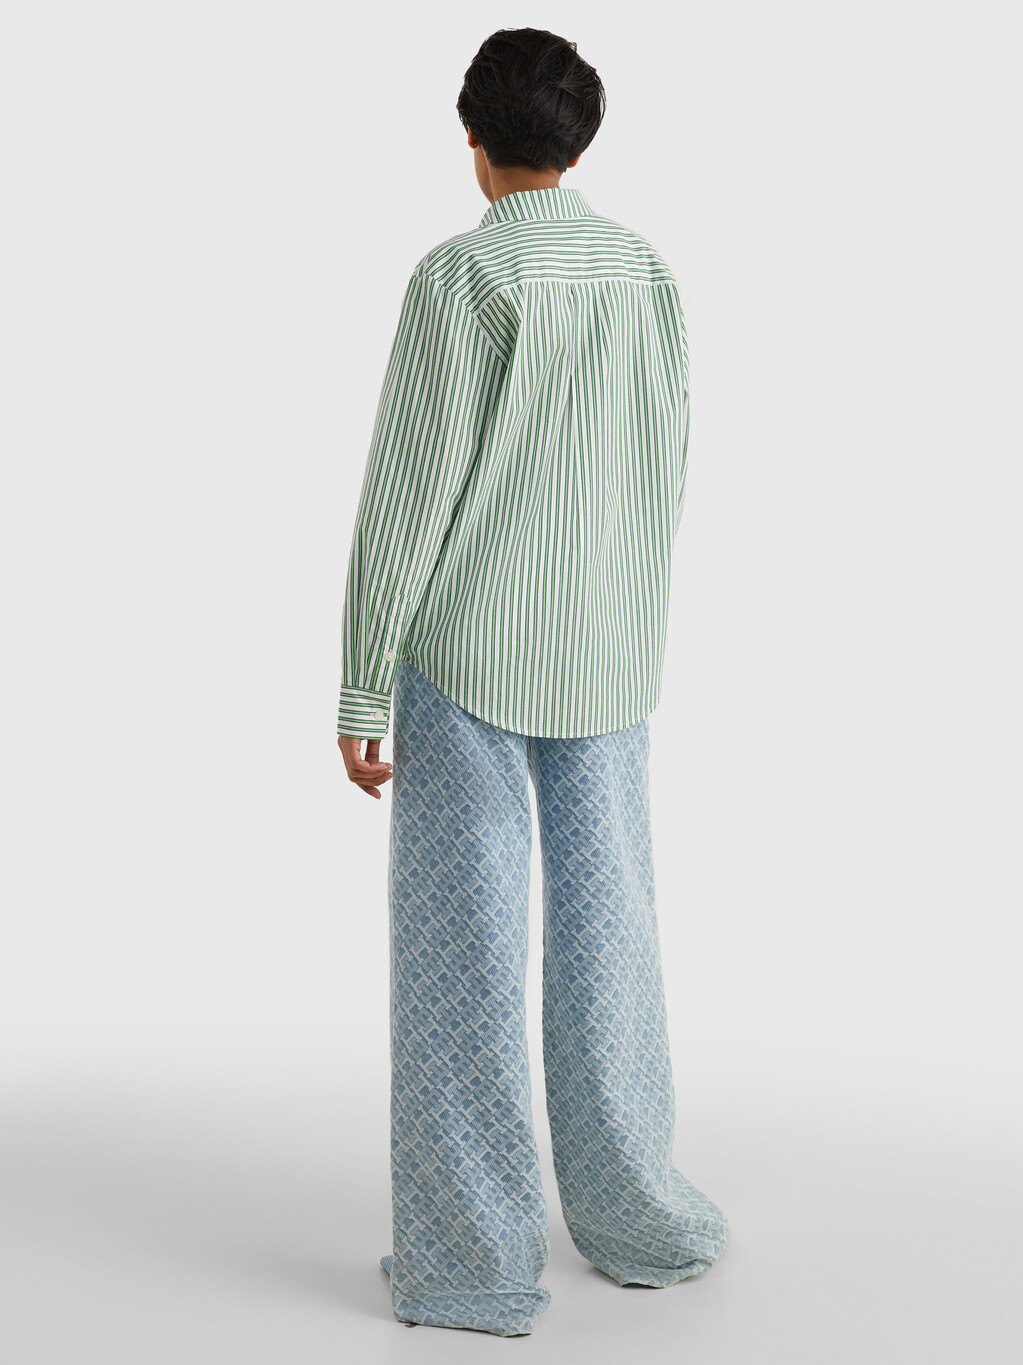 Stripe Relaxed Fit Shirt, Nola Stp/ Spring Lime, hi-res